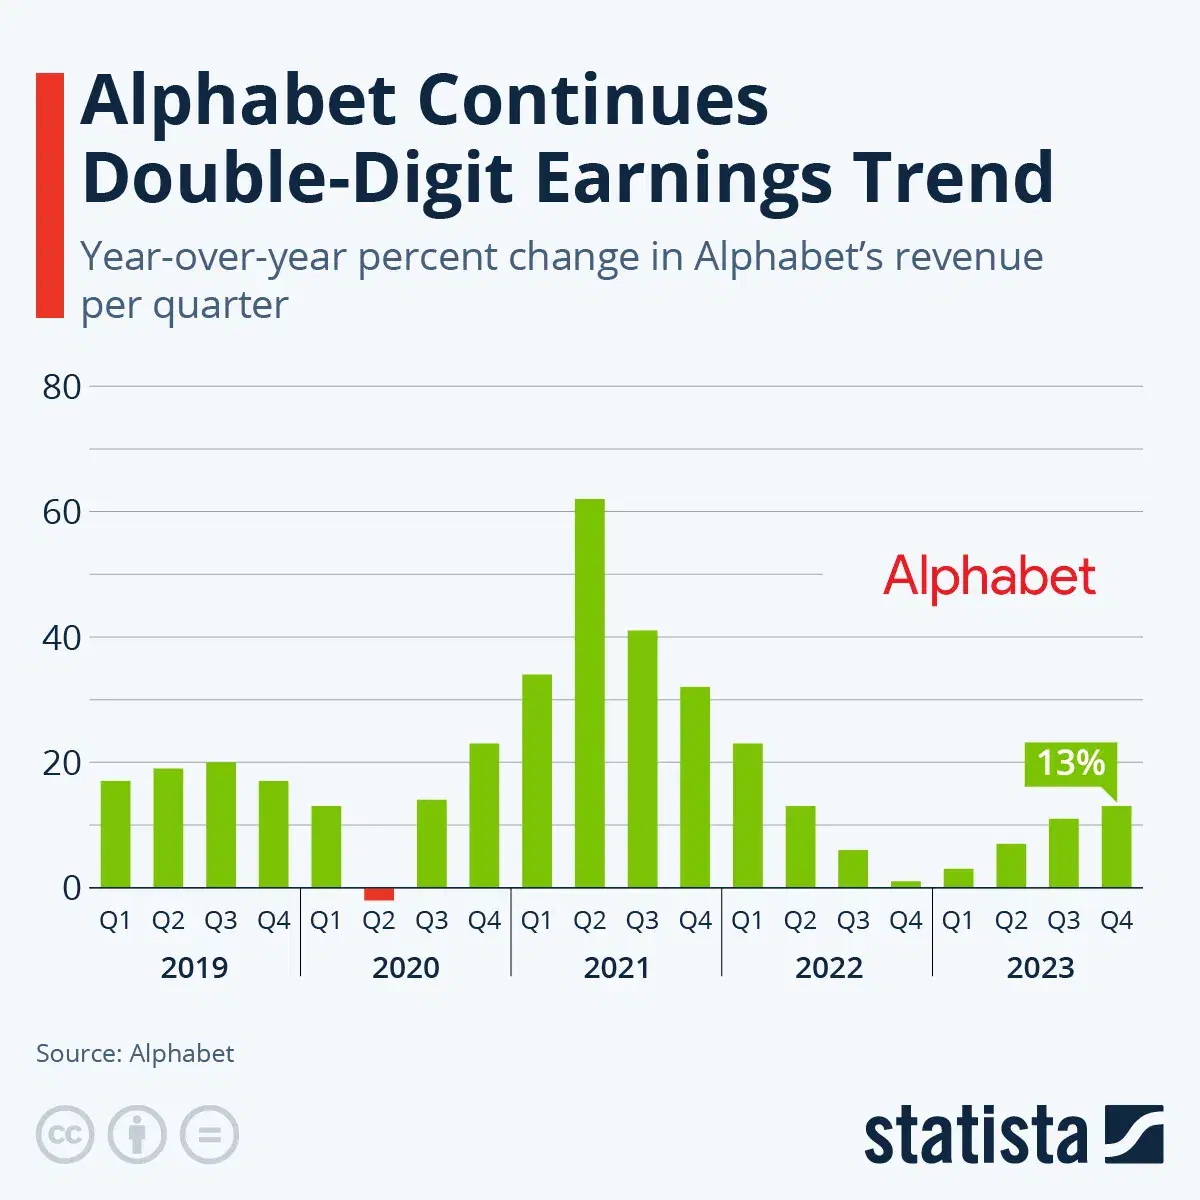 Alphabet Continues Double-Digit Earnings Trend